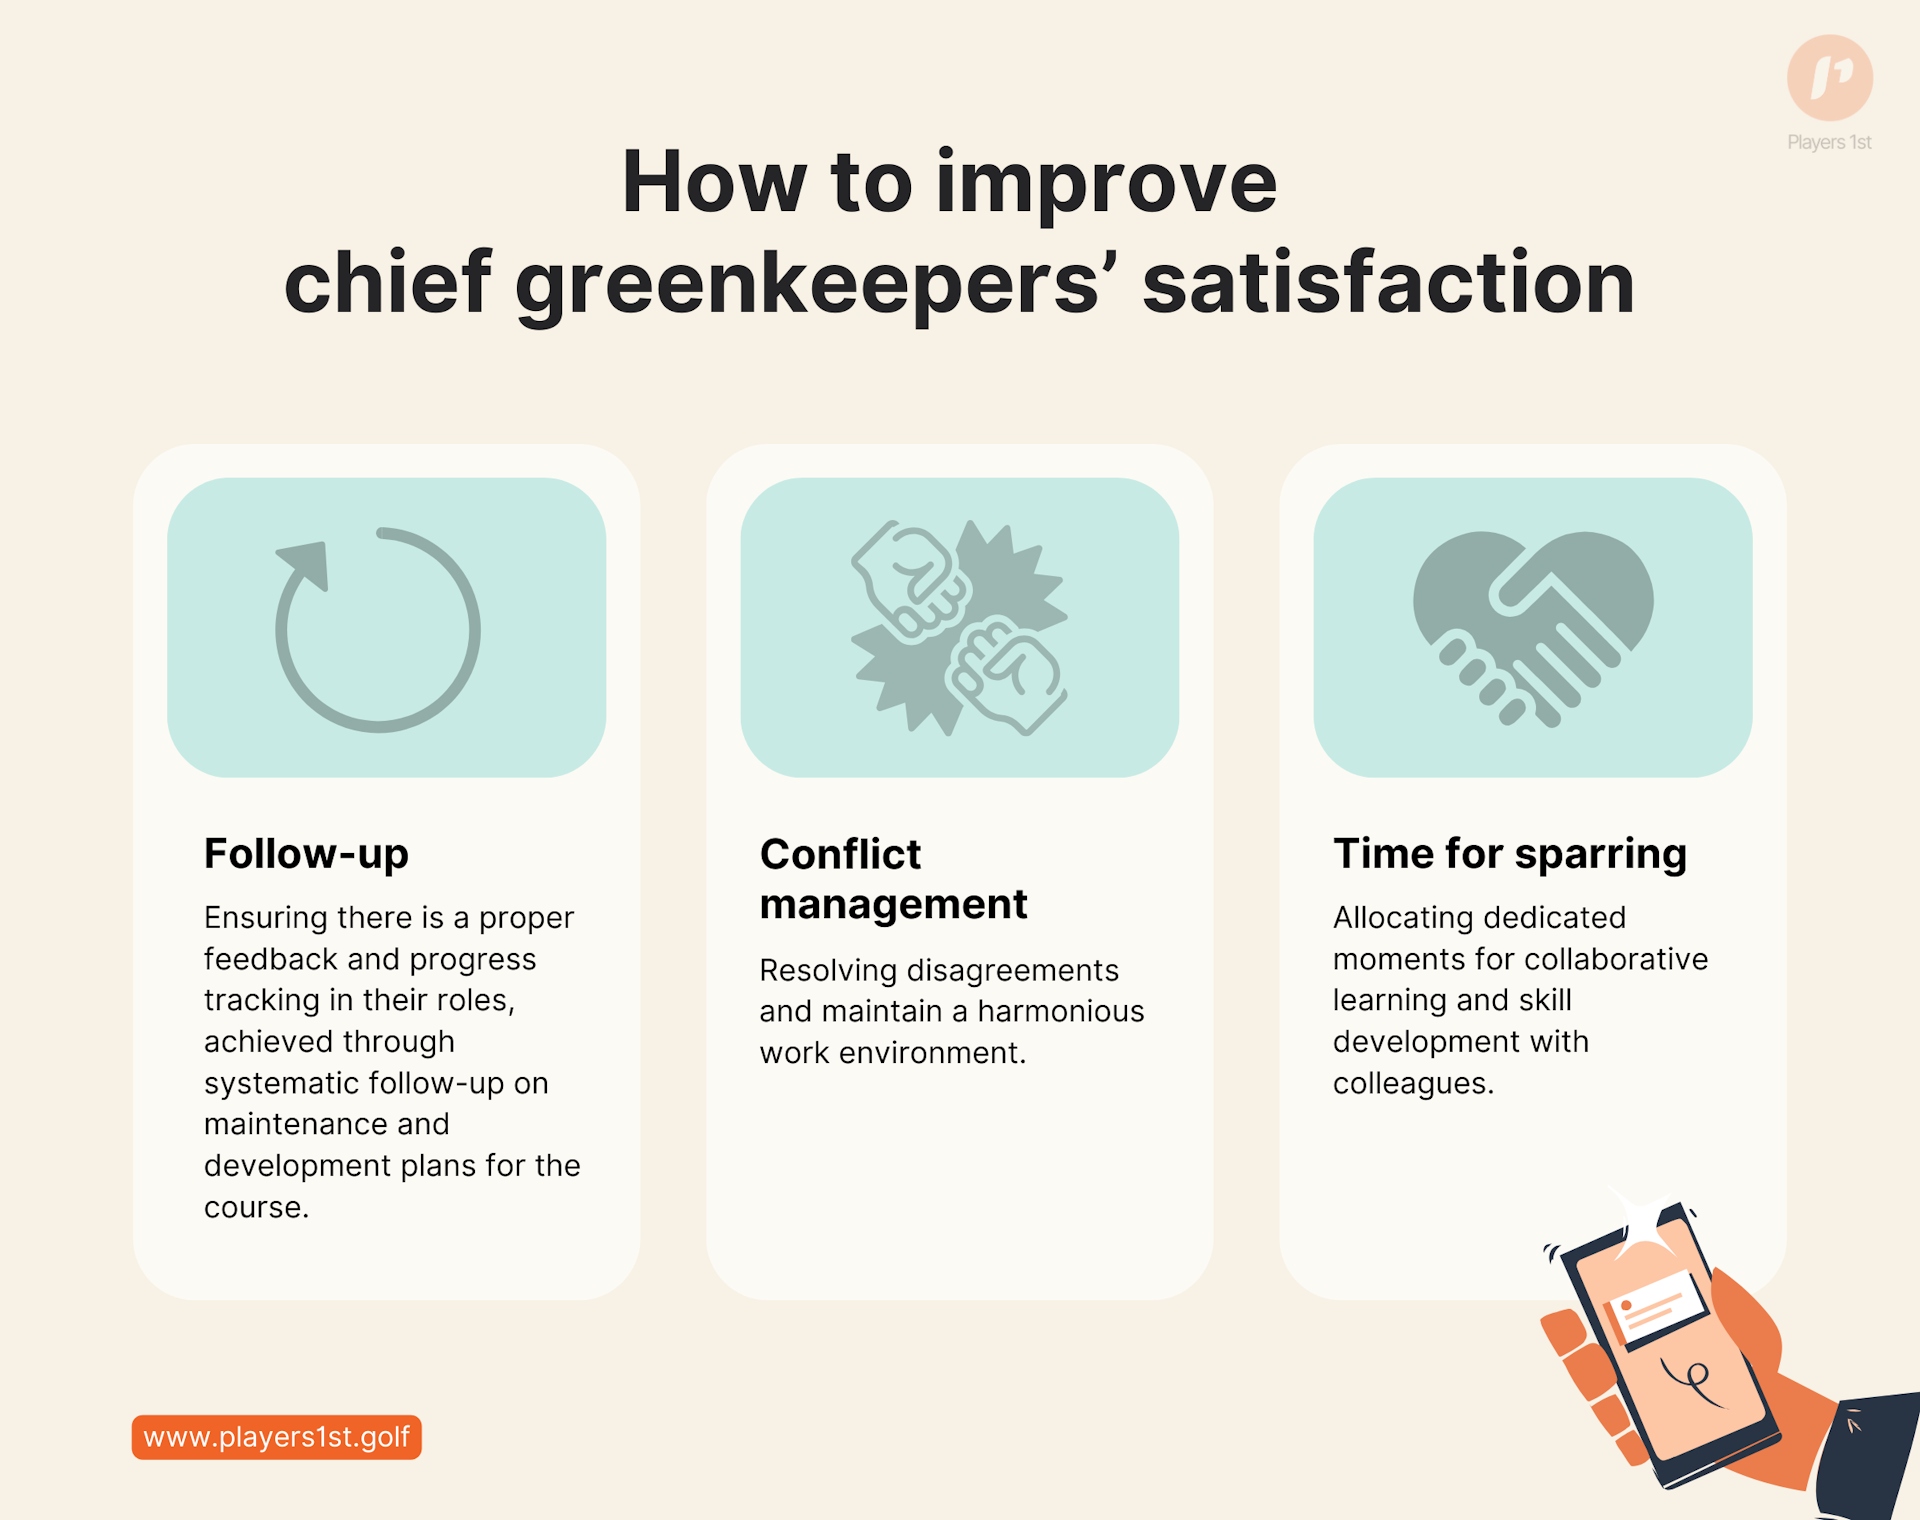 How boards can improve chief greenkeepers' satisfaction. Source: Players 1st